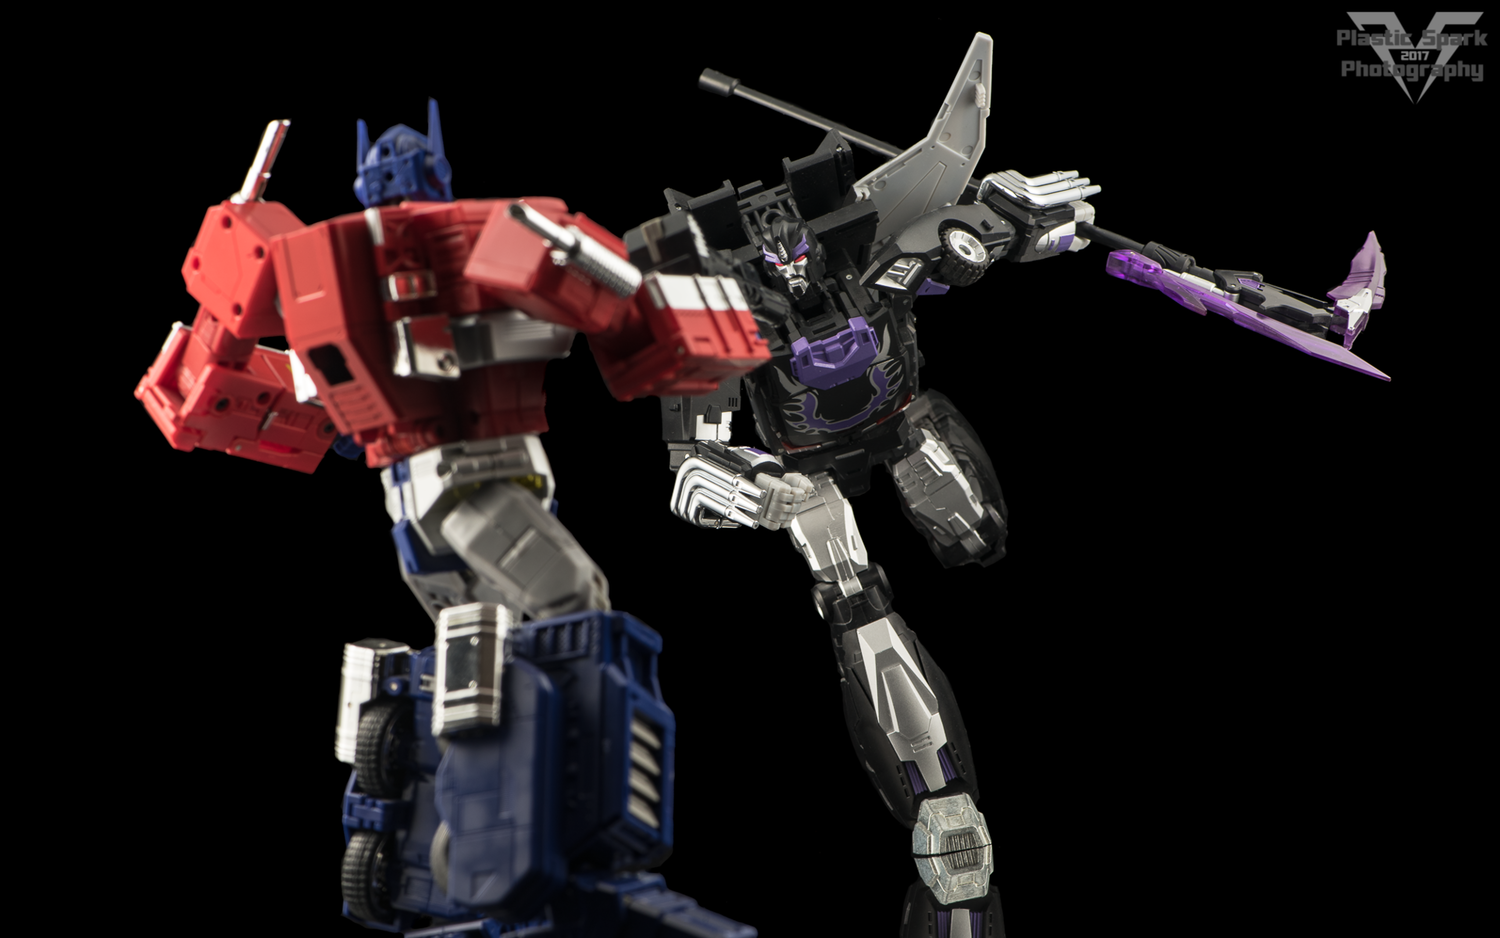 Gallery - DX9 Toys - D06T Terror — Plastic Spark Photography